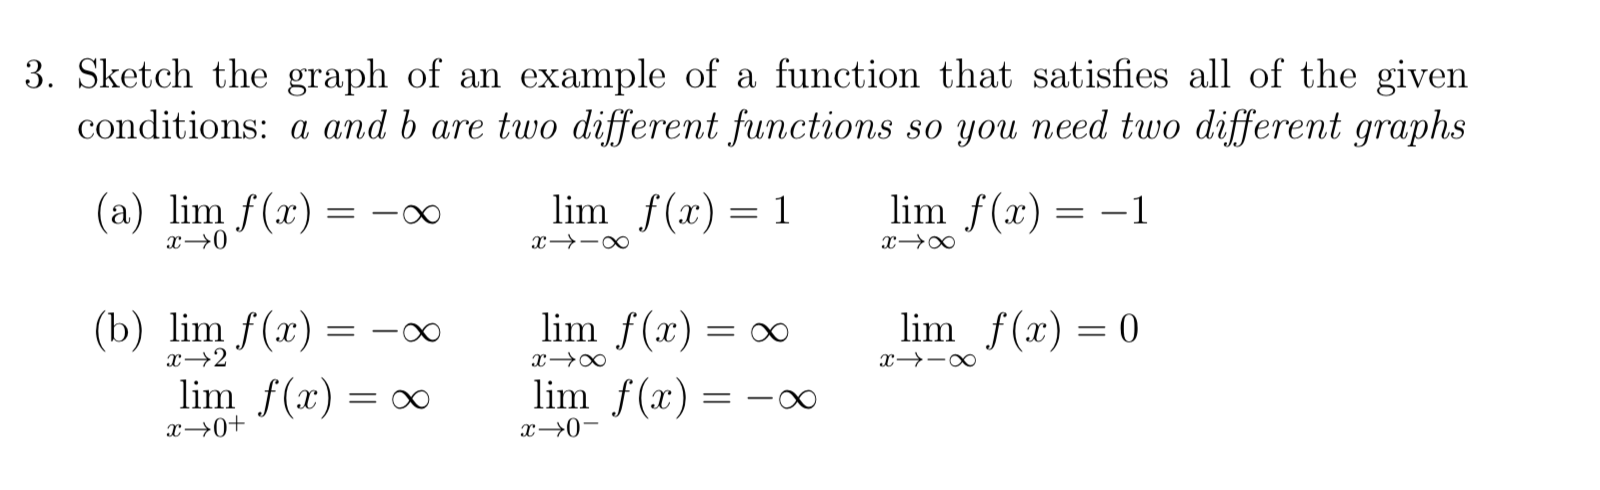 Sketch the graph of an example of a function that satisfies all of the given
conditions: a and b are two different functions so you need two different graphs
(a) lim f(x)
lim f(x) = 1
lim f(x) = -1
%3|
x→0
x→∞
lim f(x) = ∞
lim f(x) =
lim f(x) = 0
(b) lim f(x)
lim f(x) = ∞
%3D
x→2
x→0+
x→0-
